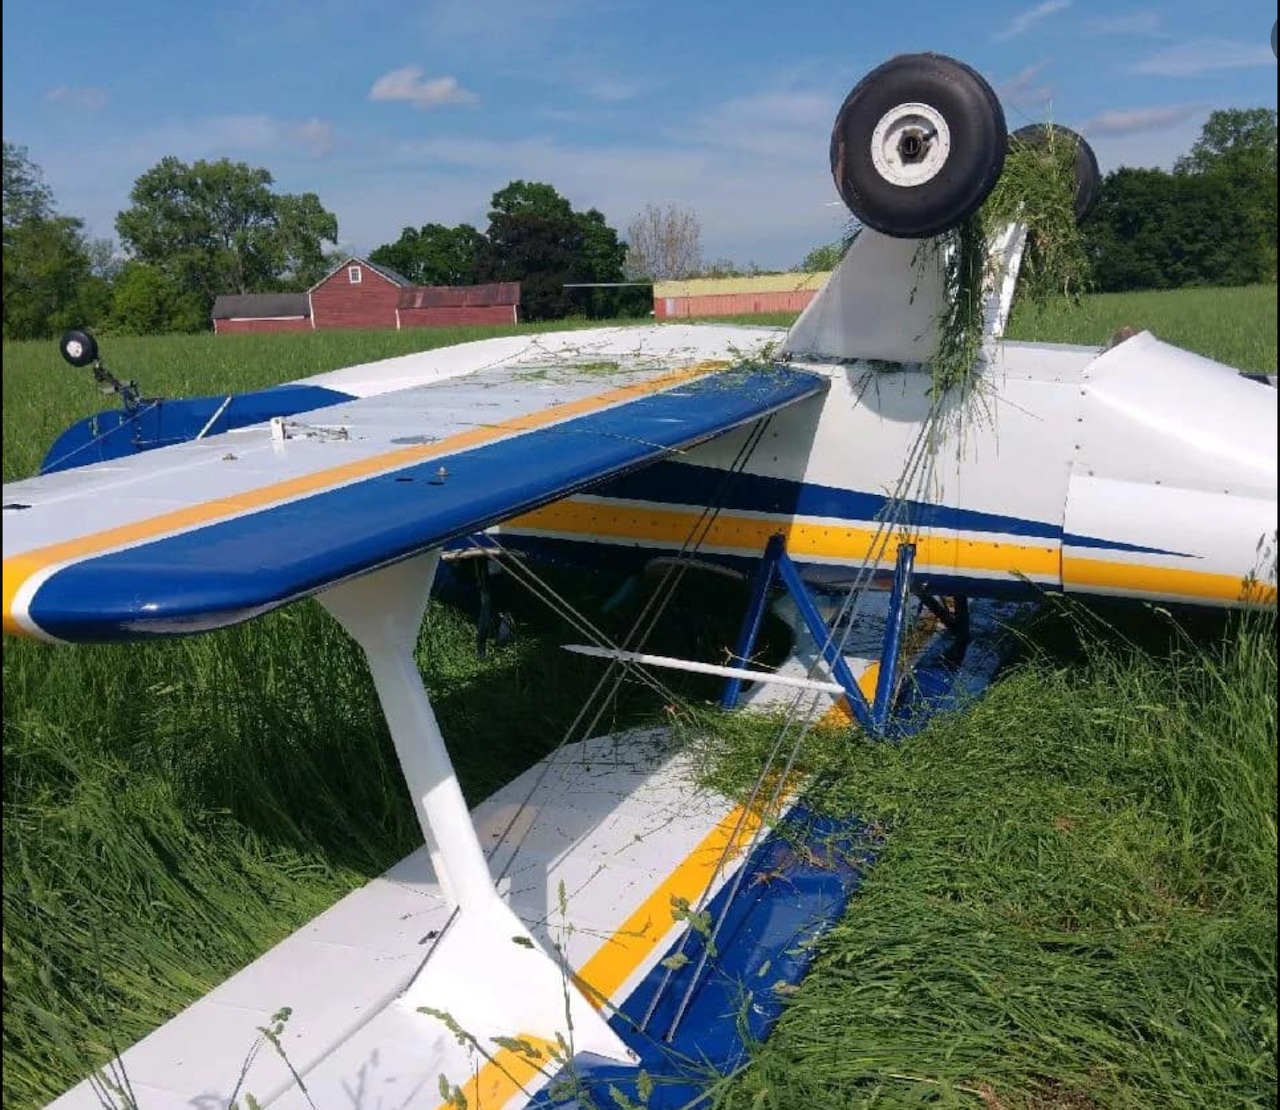 Small plane crashes, flips over in N.J. hay field, authorities say [Video]